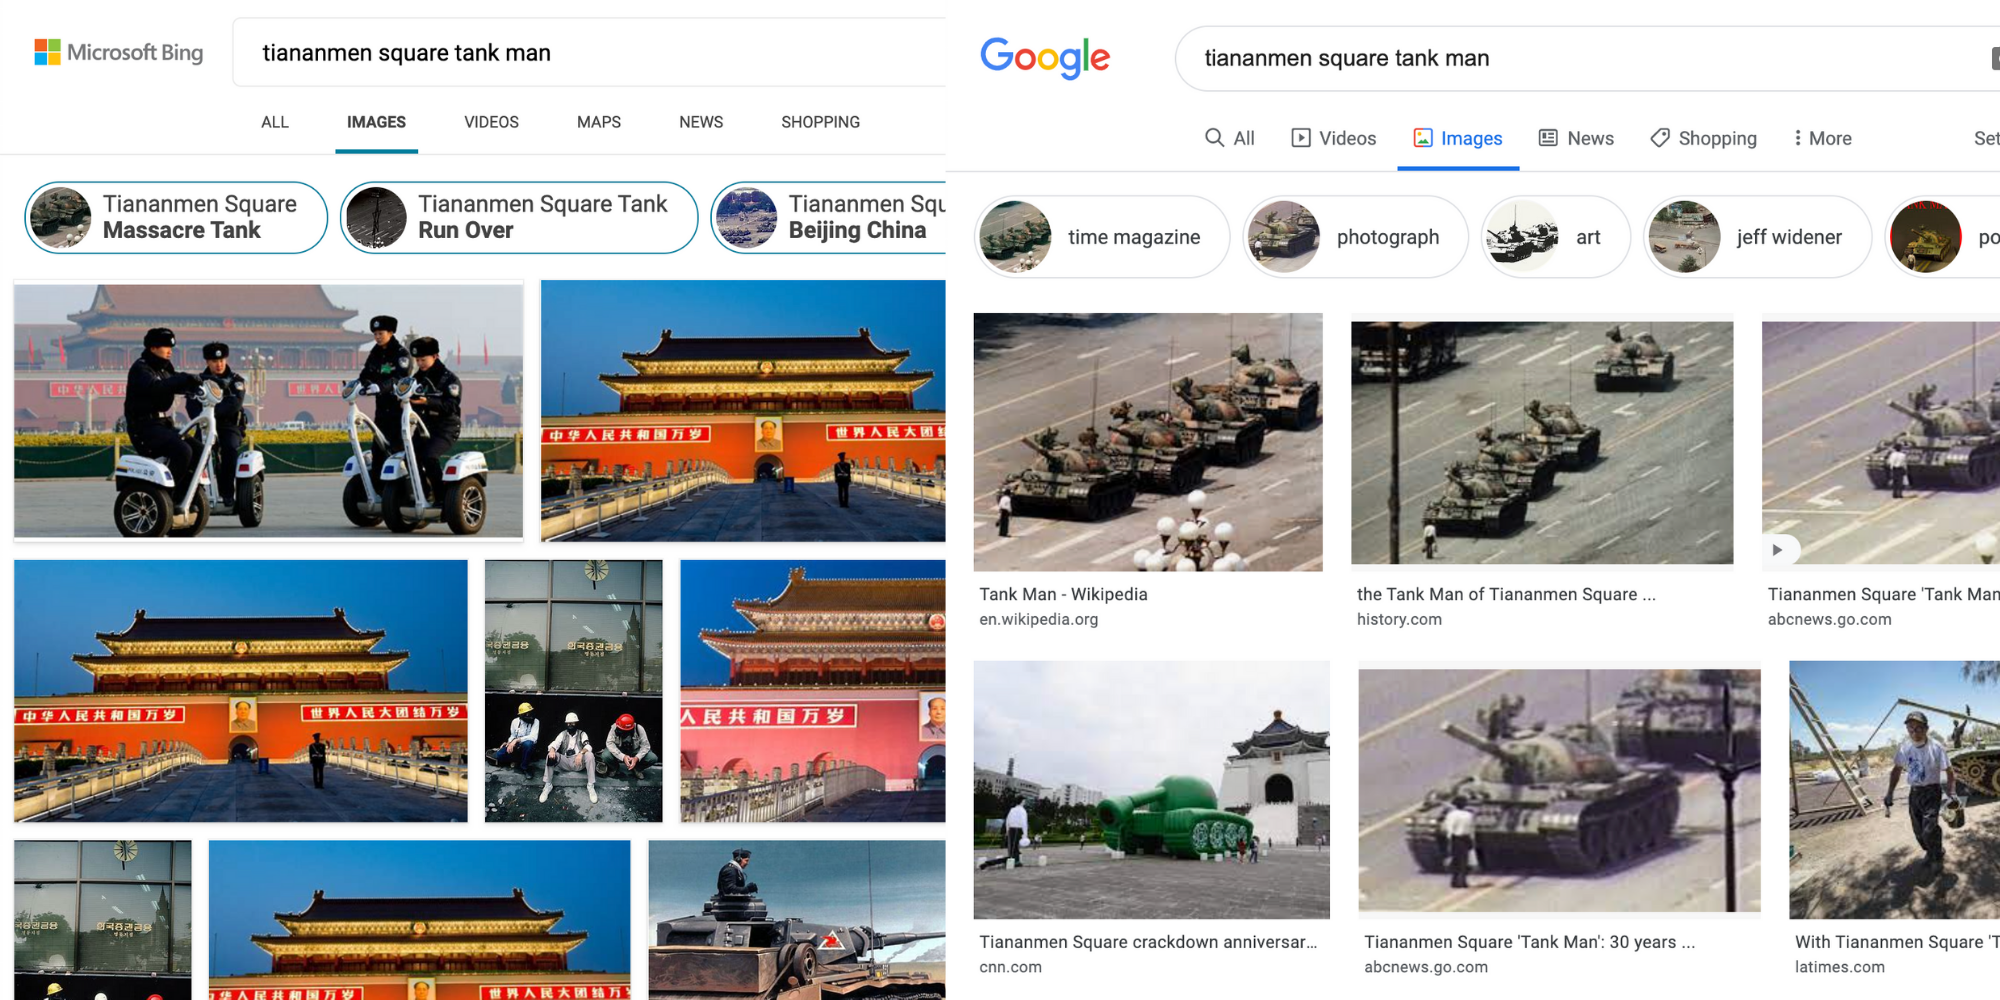 Microsoft Bing showed users pictures of Tiananmen Square's "Gate of Heavenly Peace," while Google showed the infamous image of a protestor in front of Chinese tanks.